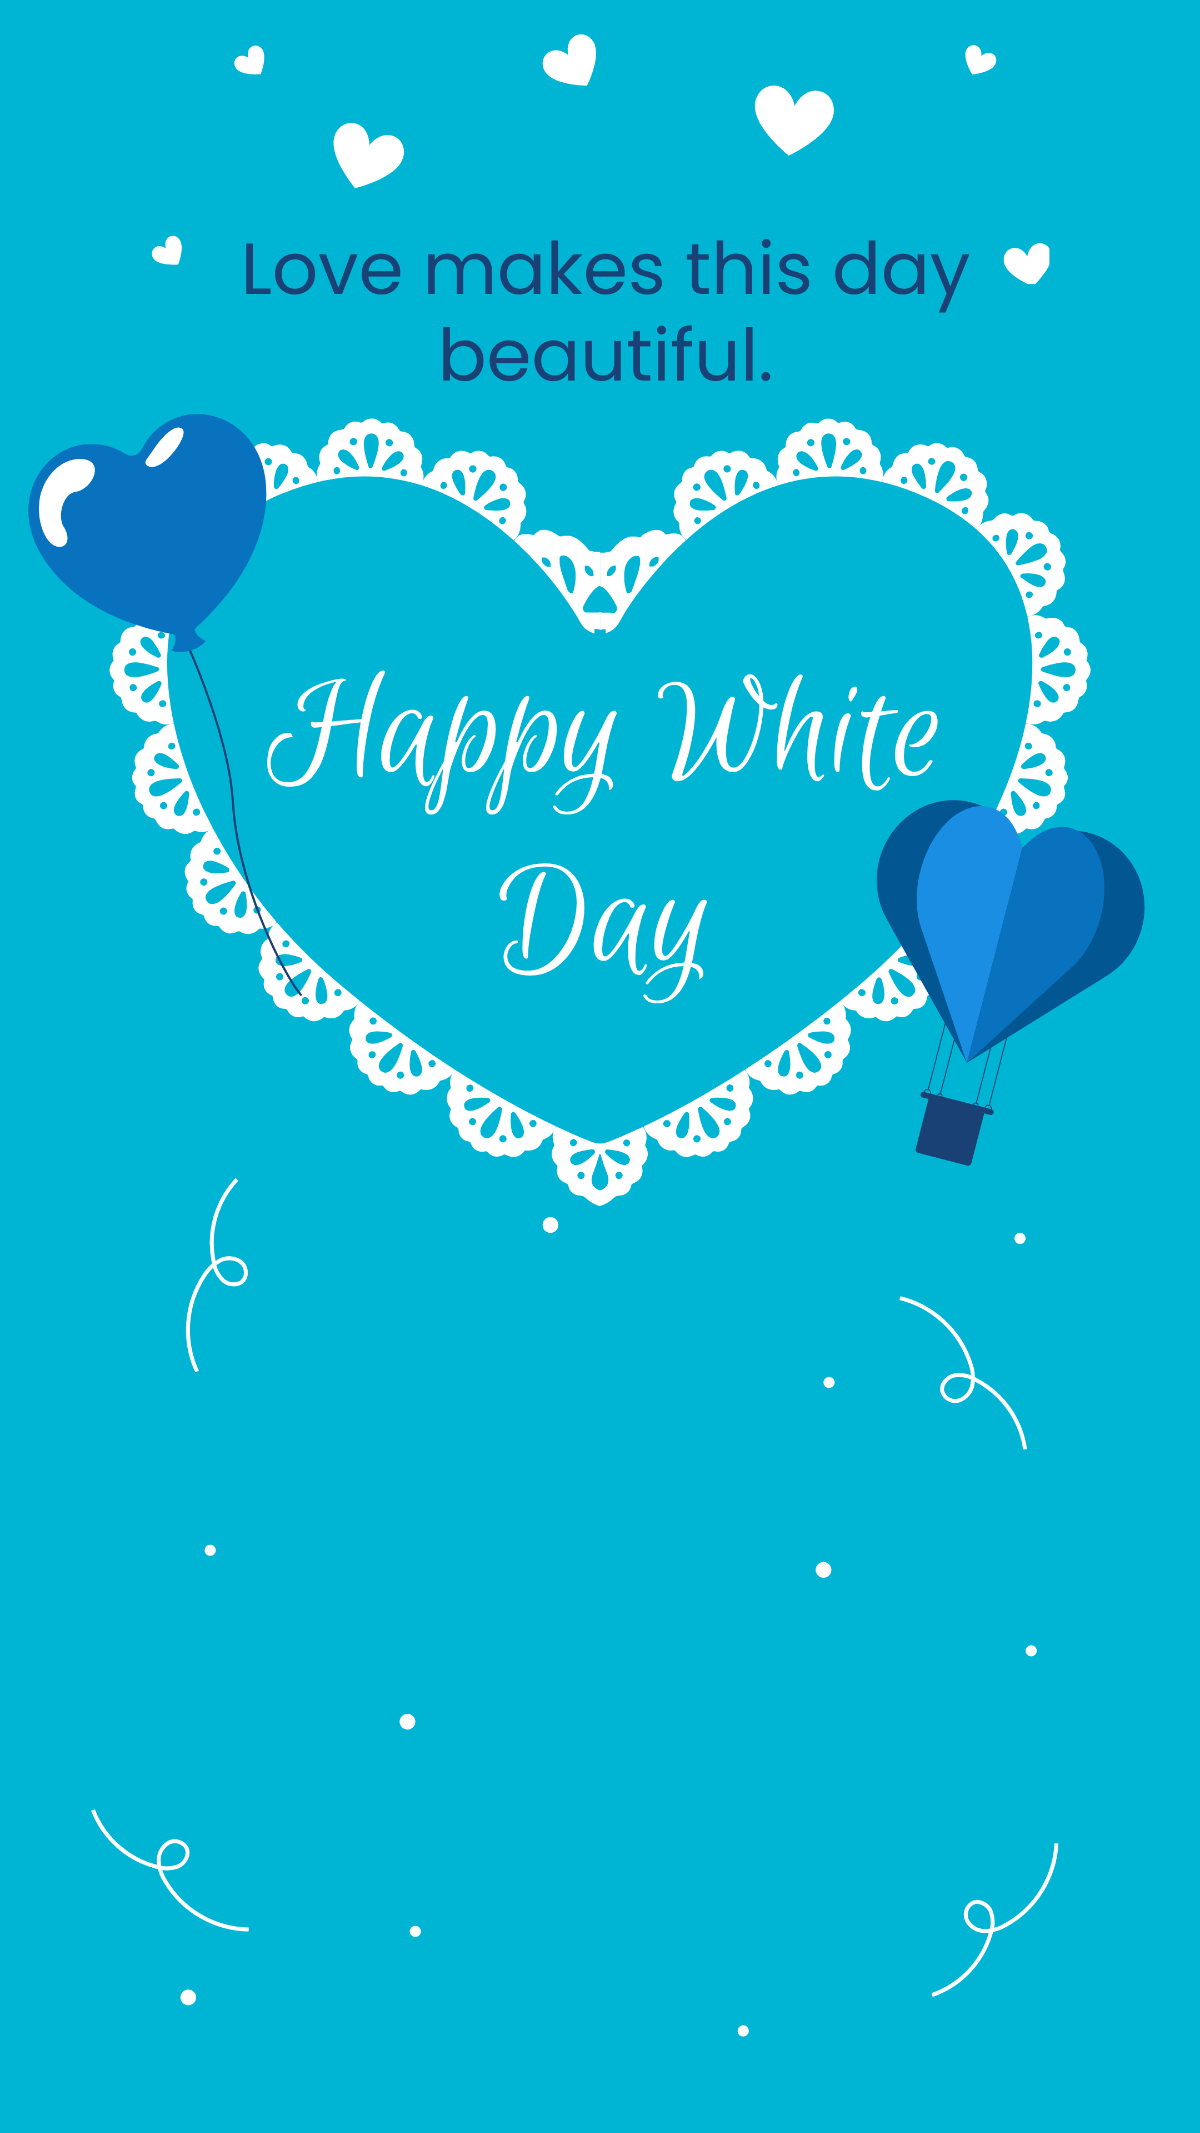 White Day Snapchat Geofilter Template